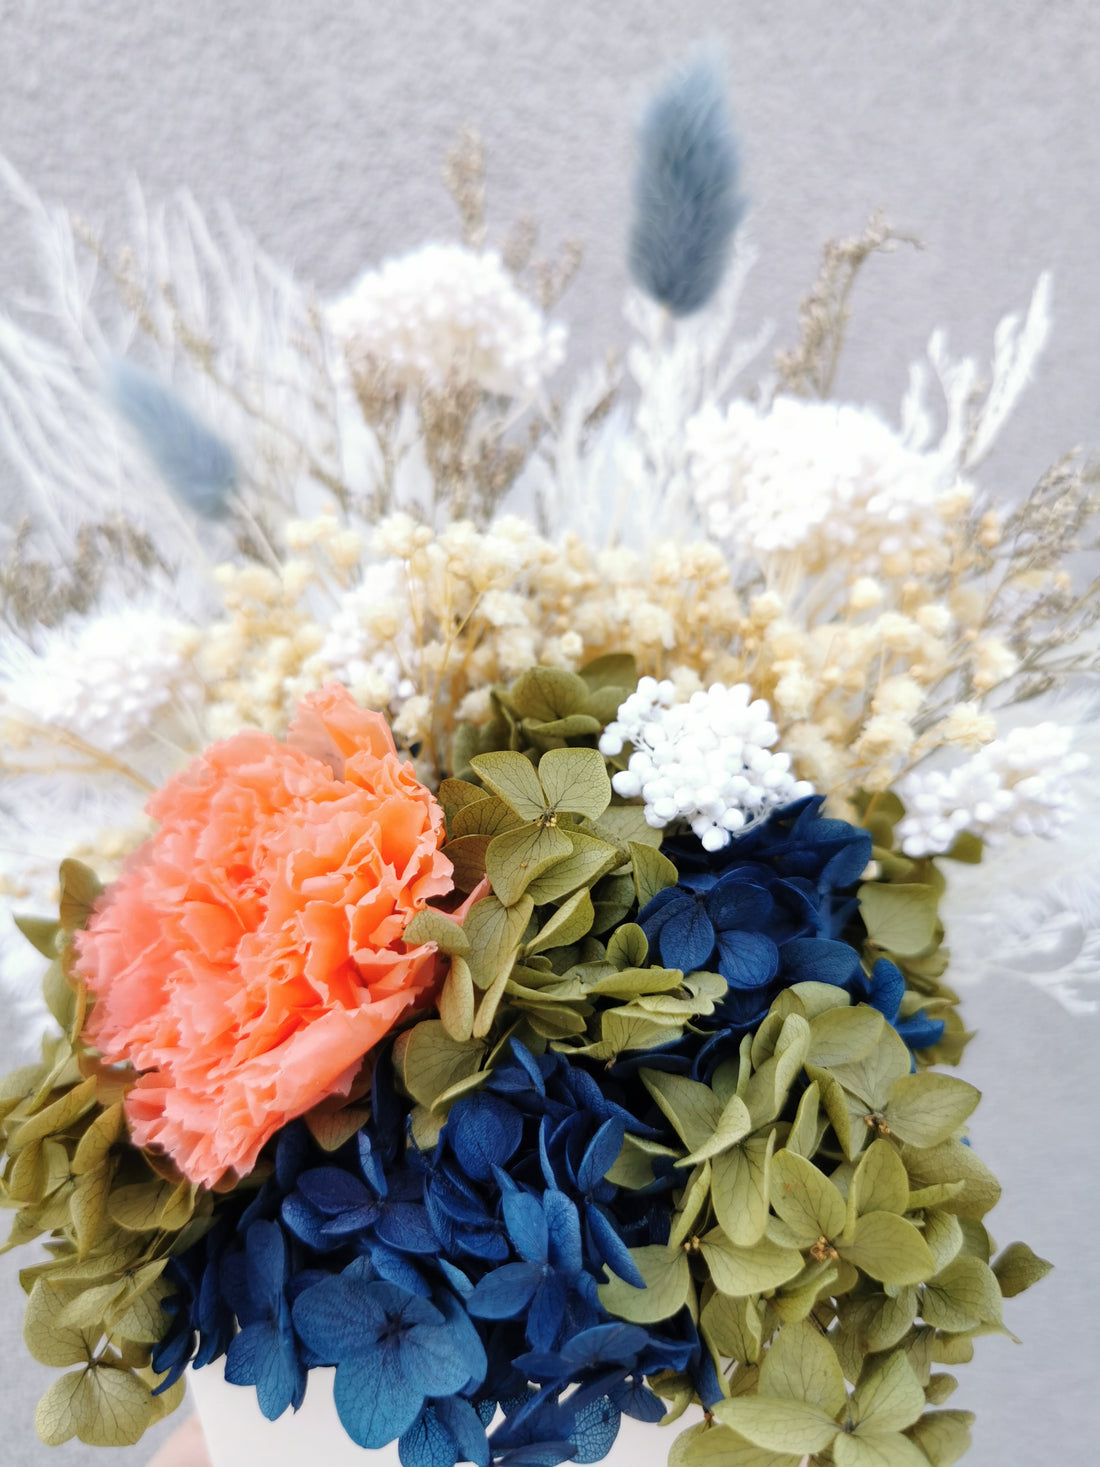 From Blooms to Perfection: Unlocking the True Beauty of Dried Flower Arrangements